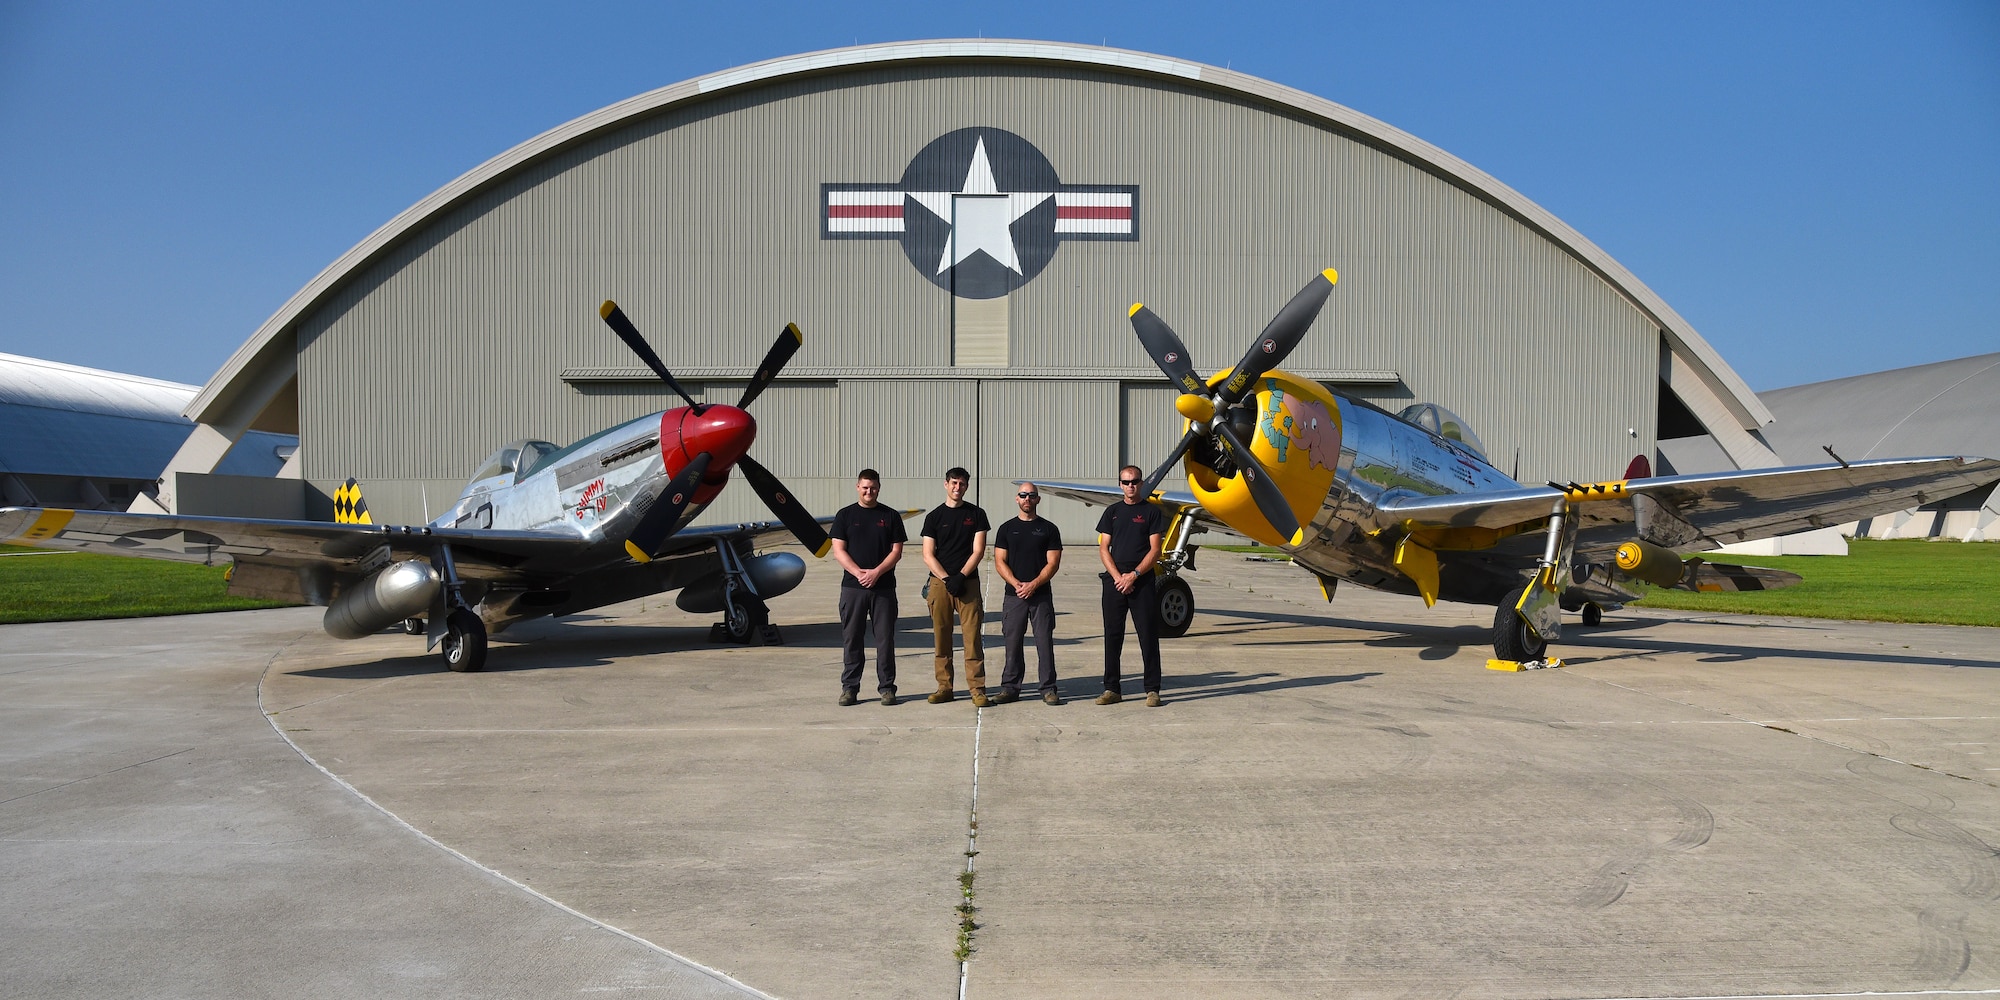 Museum restoration specialists(from left to right) Nick Almeter, Casey Simmons, Chase Meredith, and Brian Lindamood pose for a photo with the North American P-51D Mustang and the Republic P-47D (Bubble Canopy Version) at the National Museum of the U.S. Air Force on Aug. 14, 2018. They are well versed in a variety of skills ranging from machine and woodworking expertise to precision craftsmanship in sheet metal and painting. Their knowledge of aircraft spans years of technology -- from World War I fabric covered aircraft to the elite fighters of today's Air Force. (U.S. Air Force photo by Ken LaRock)